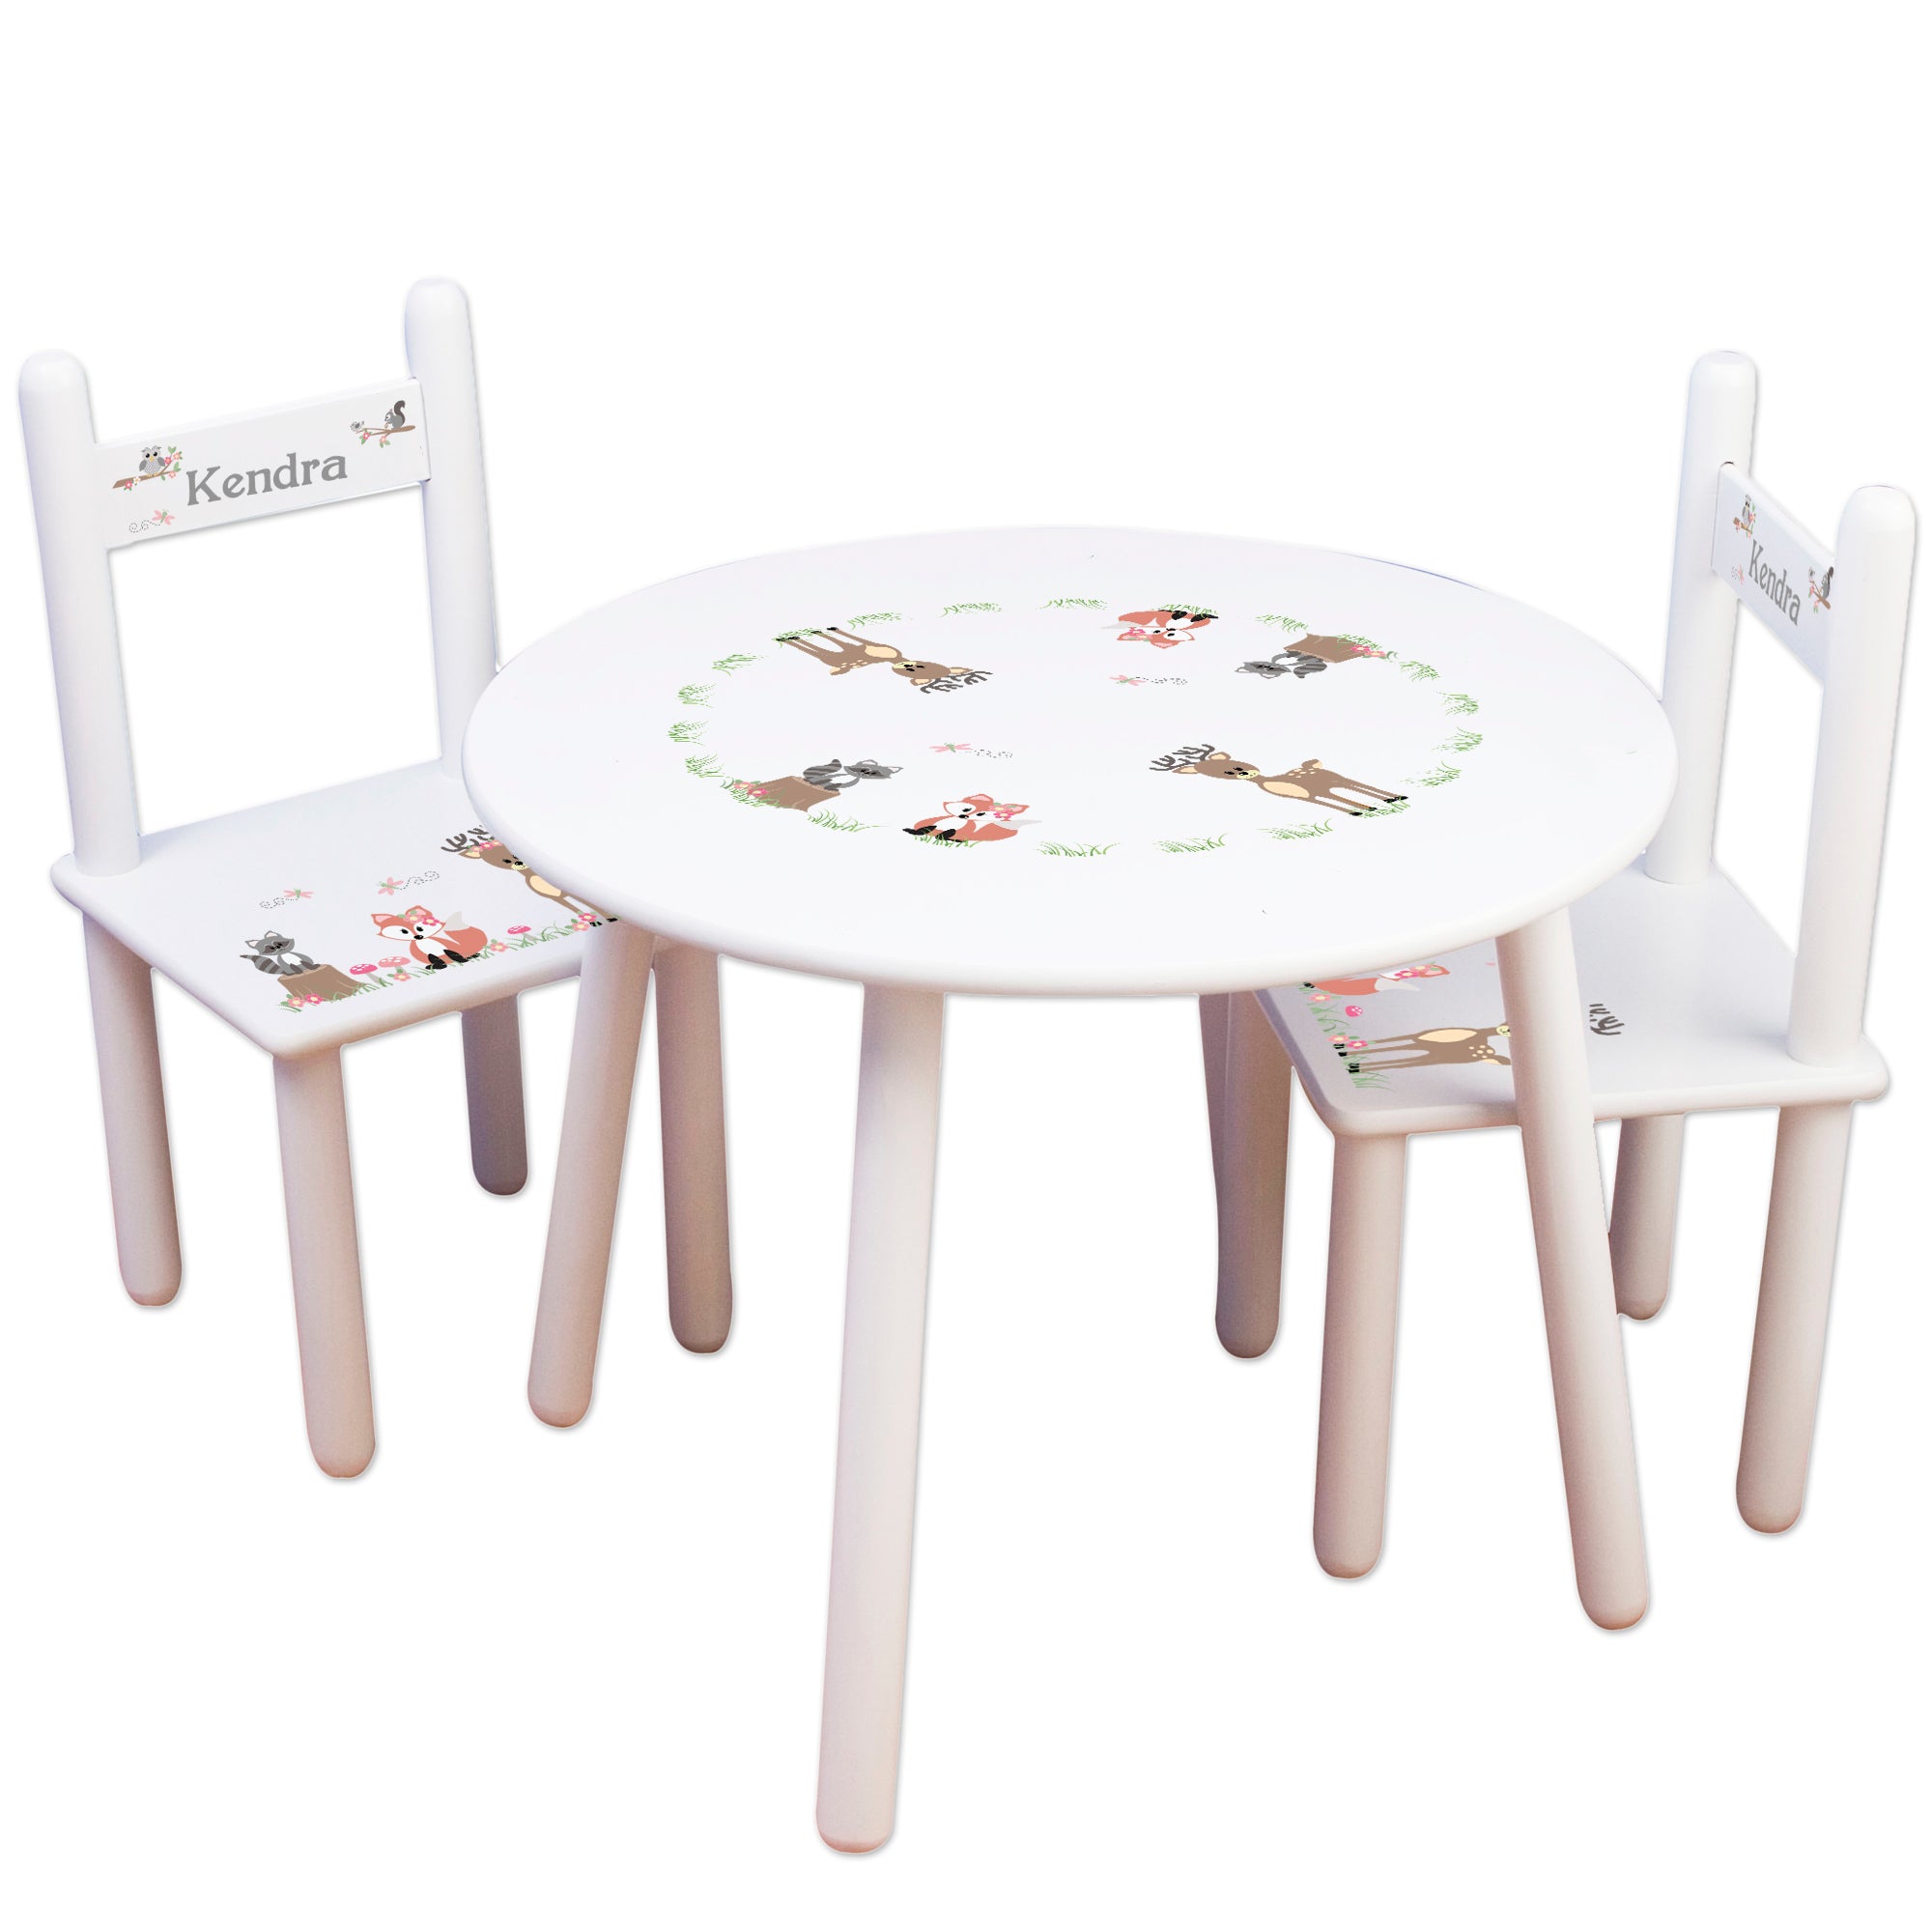 personalized woodland animal child's table and chair set